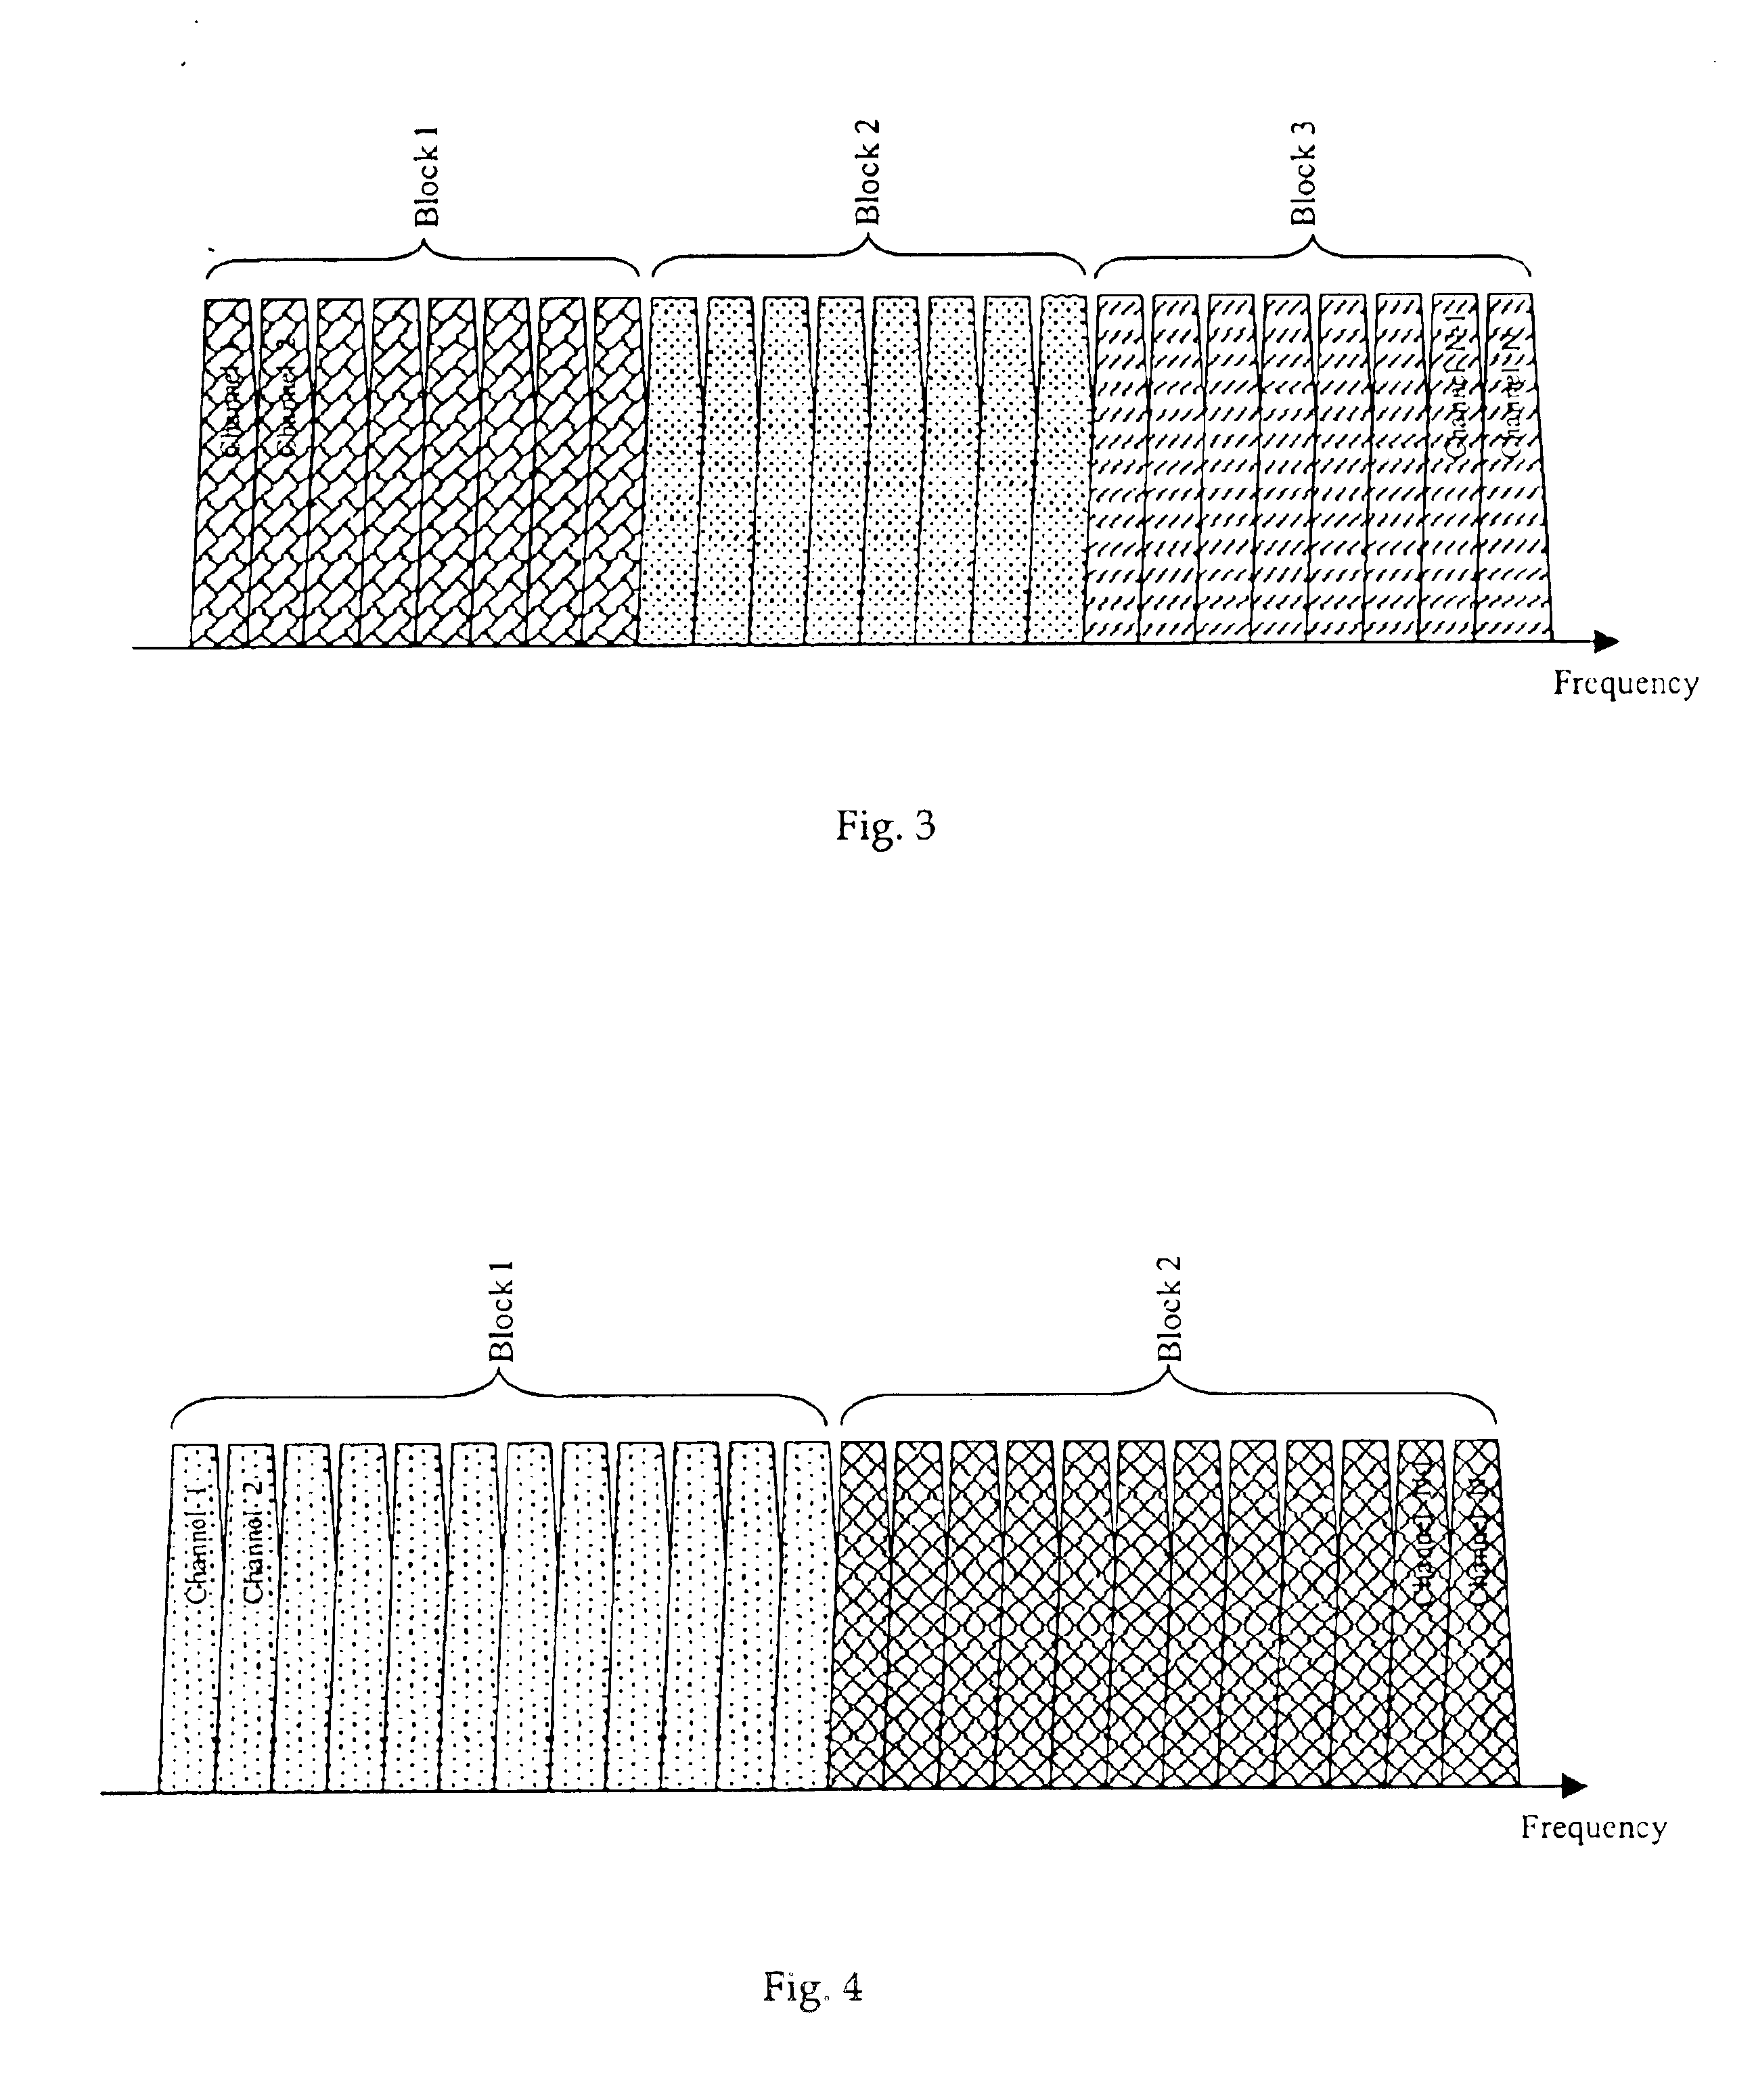 Method and system for reducing wireless multi-cell interferences through segregated channel assignments and segregated antenna beams